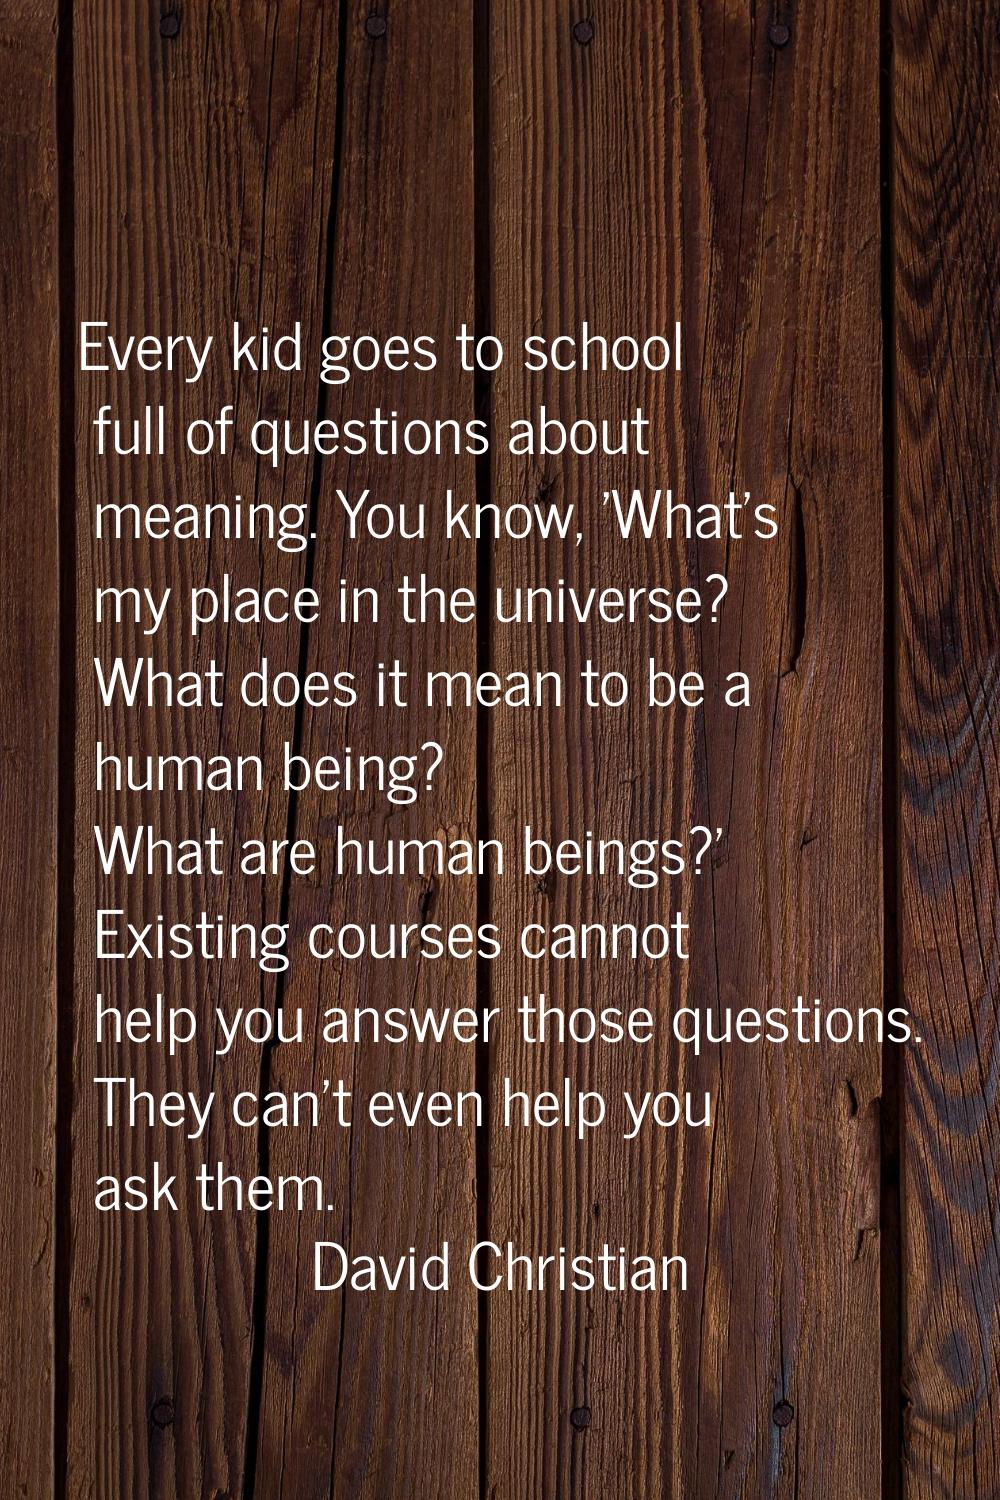 Every kid goes to school full of questions about meaning. You know, 'What's my place in the univers